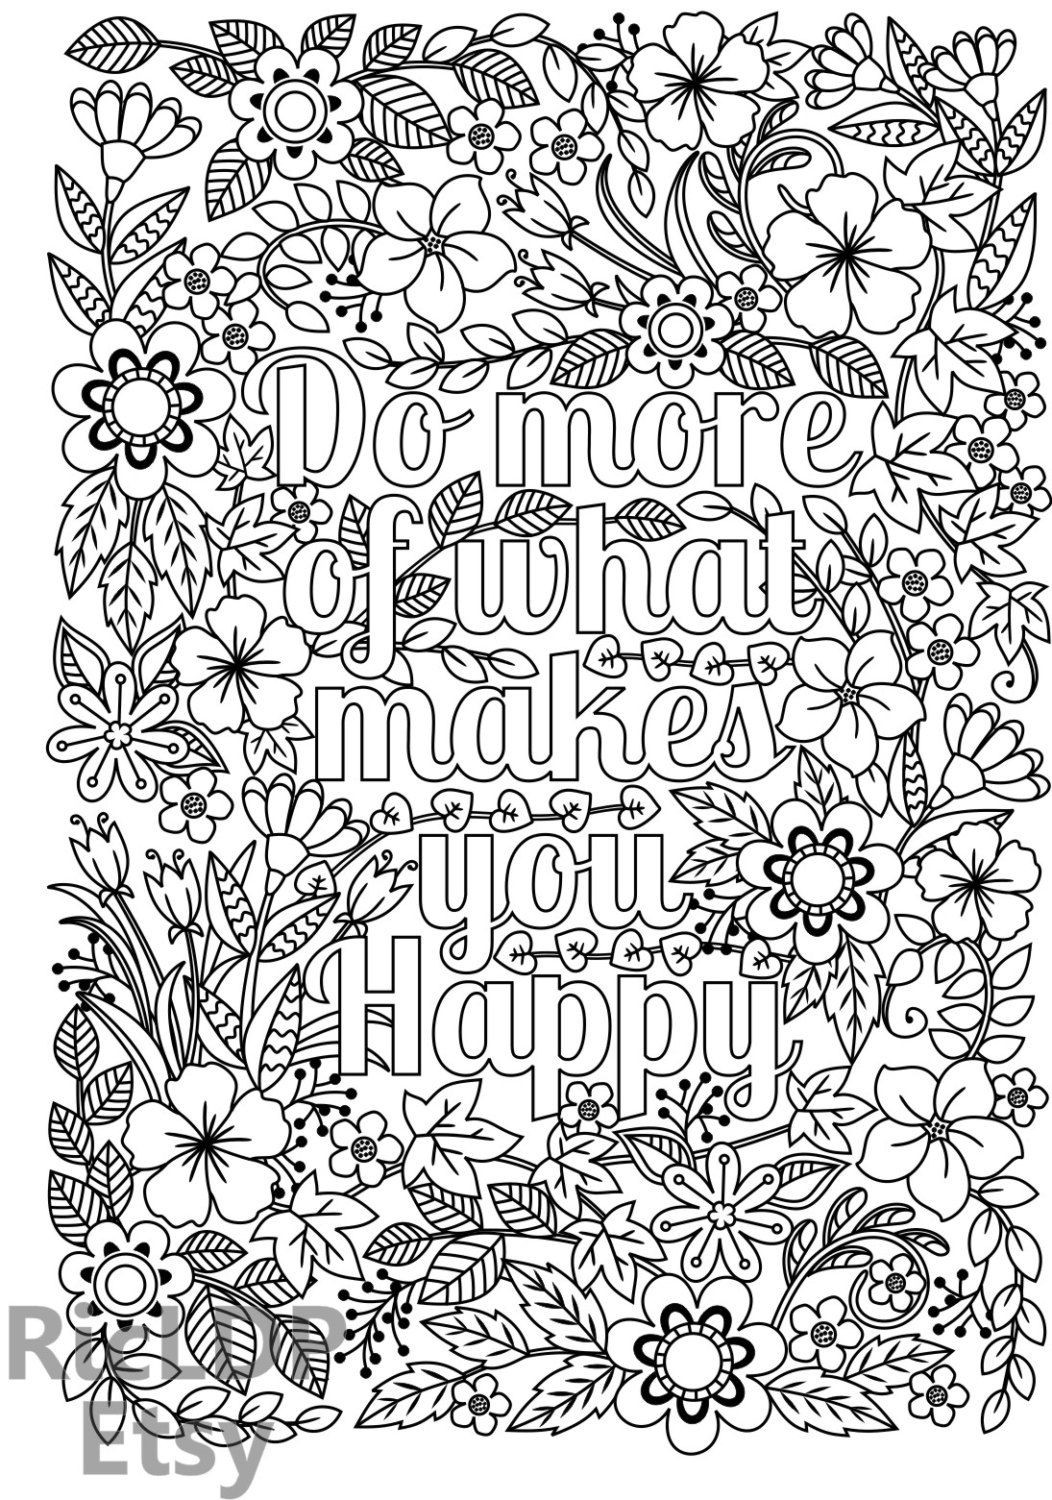 Adult Coloring Pages Free Printables
 Do More of What Makes You Happy Coloring Page for Kids